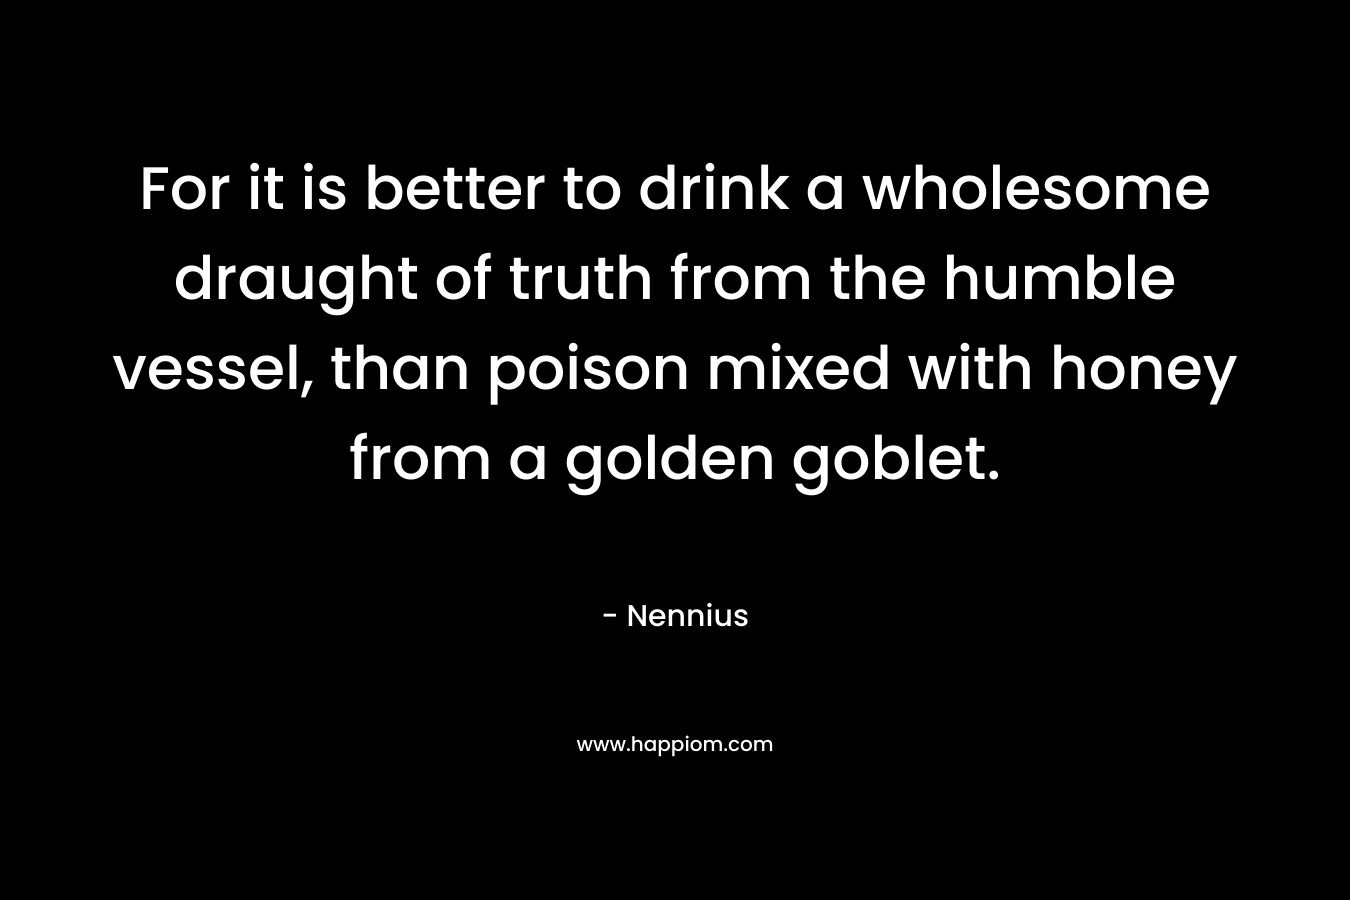 For it is better to drink a wholesome draught of truth from the humble vessel, than poison mixed with honey from a golden goblet. – Nennius